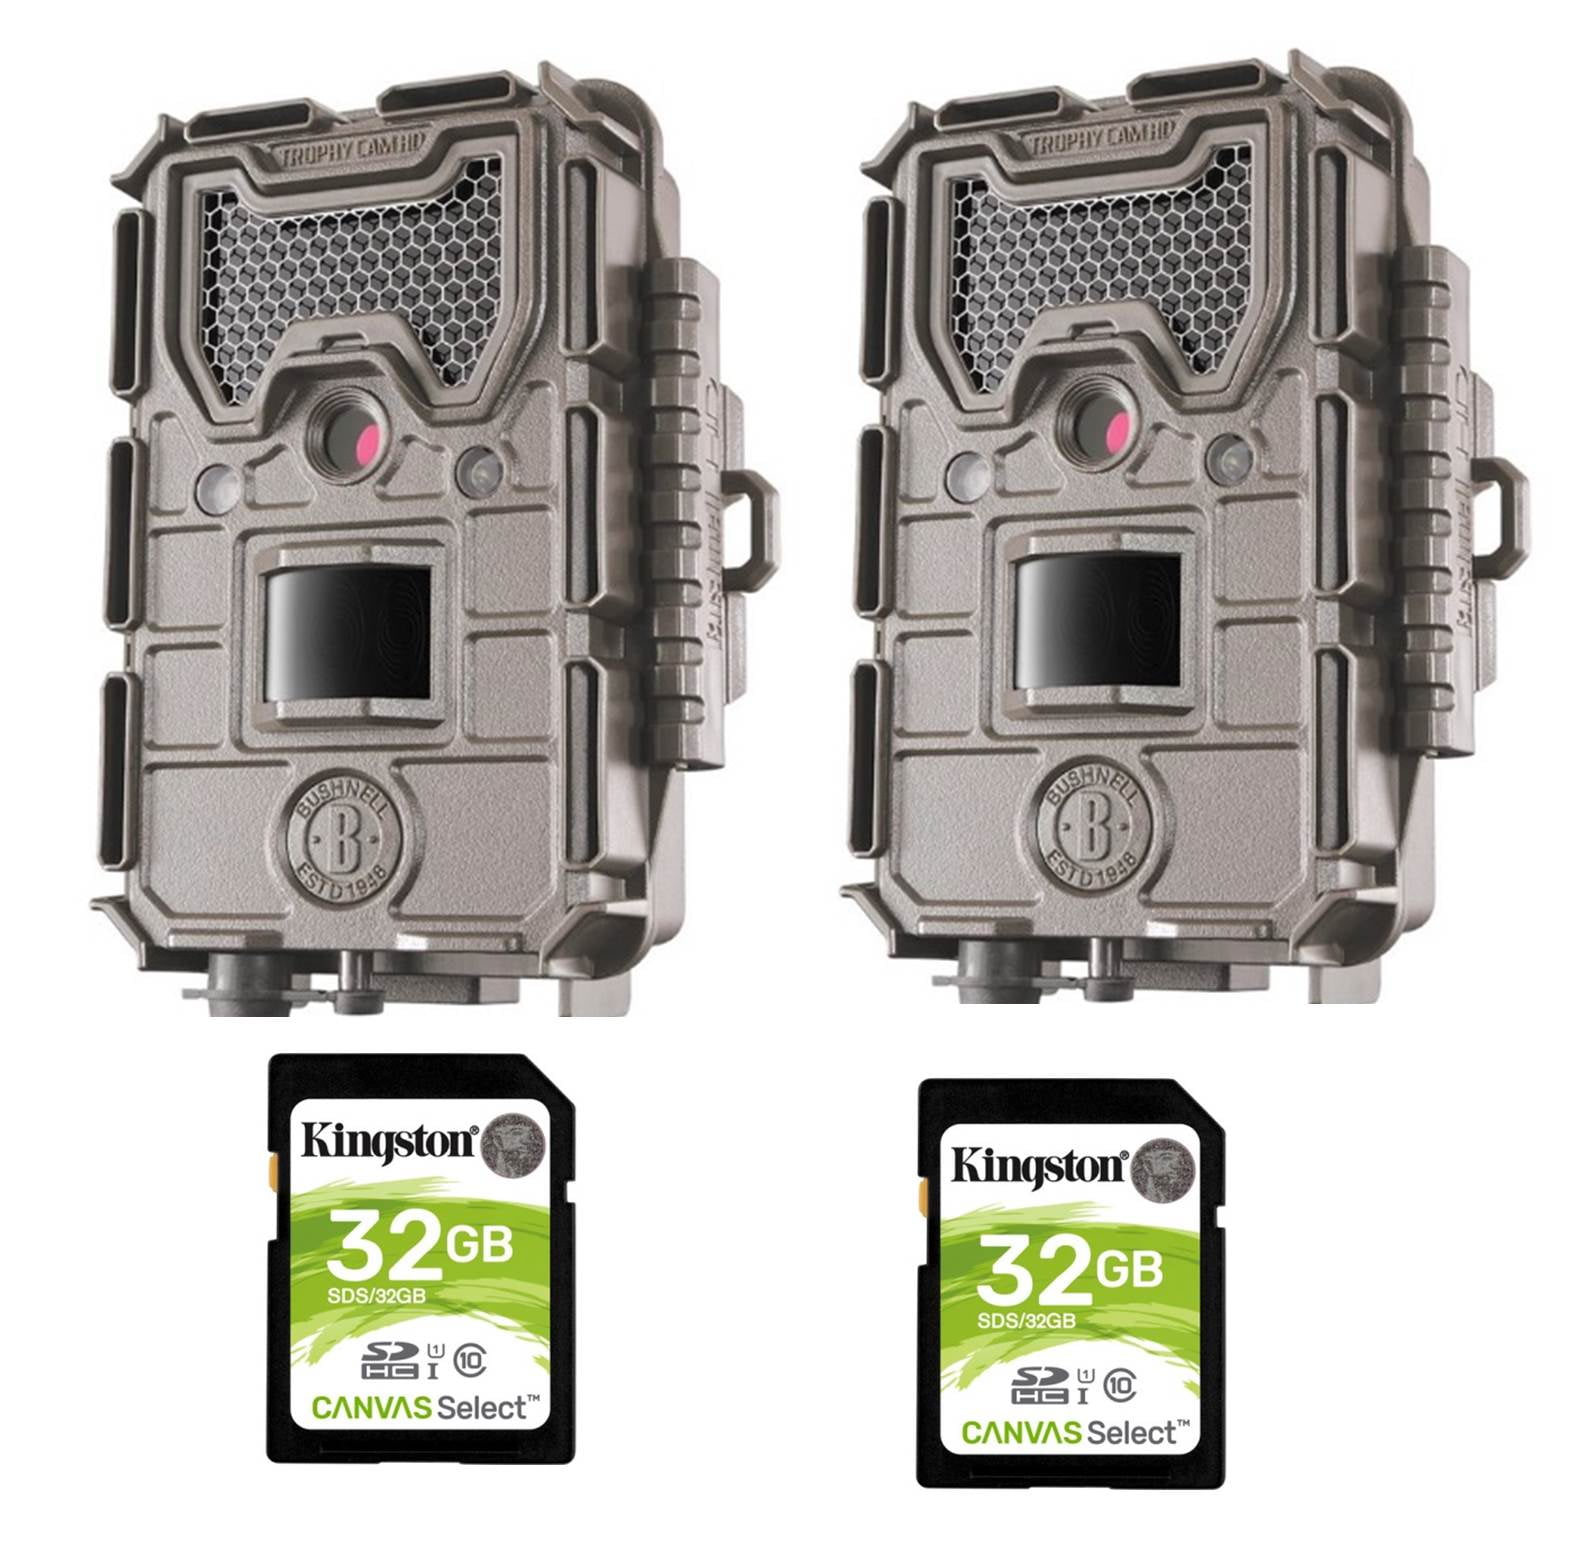 bushnell-trail-camera-kit-essential-16mp-hd-cam-low-glow-2-pack-2